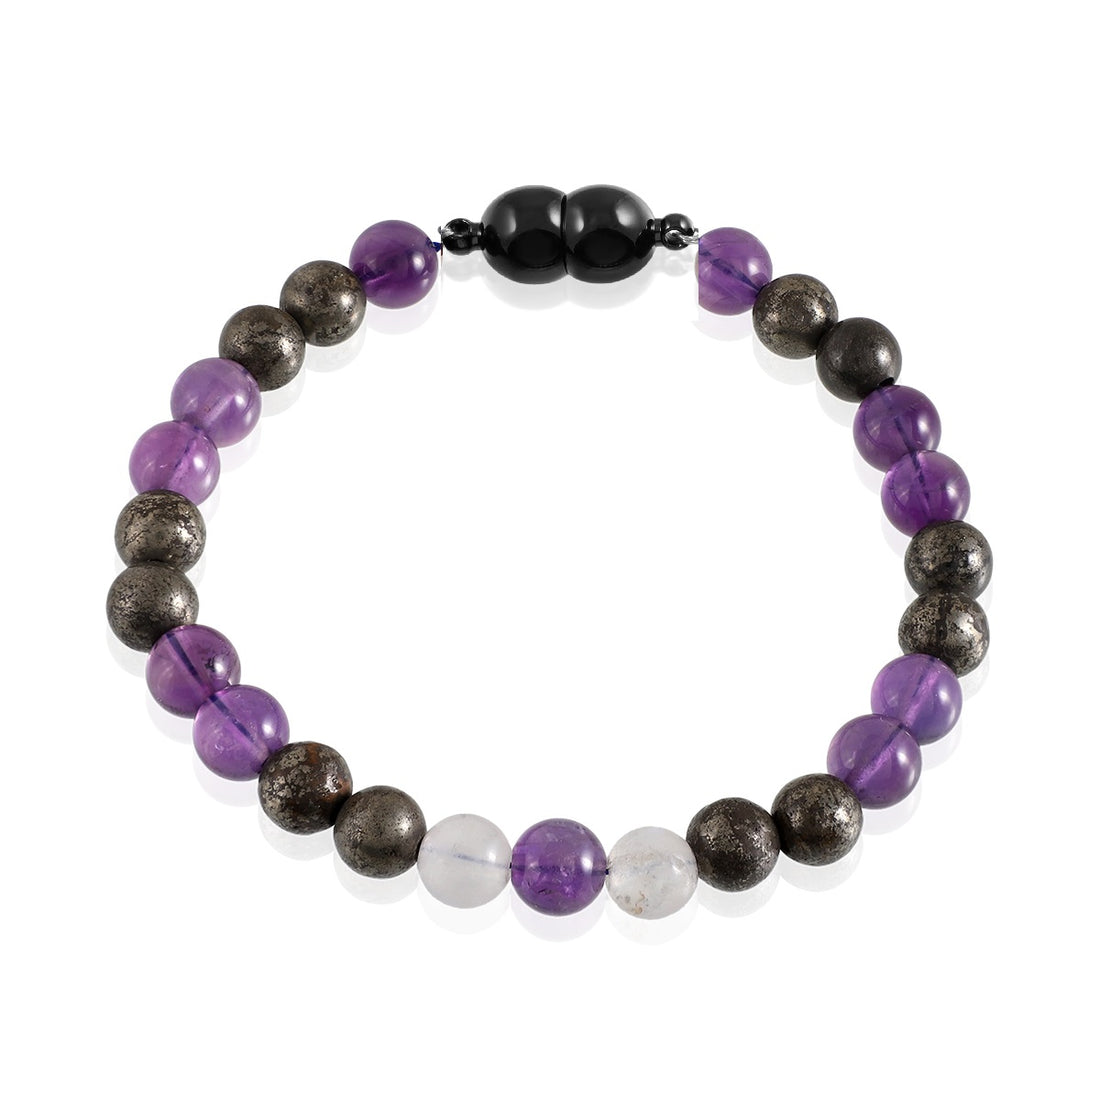 Amethyst, Pyrite and Moonstone Bracelet with Magnetic Lock